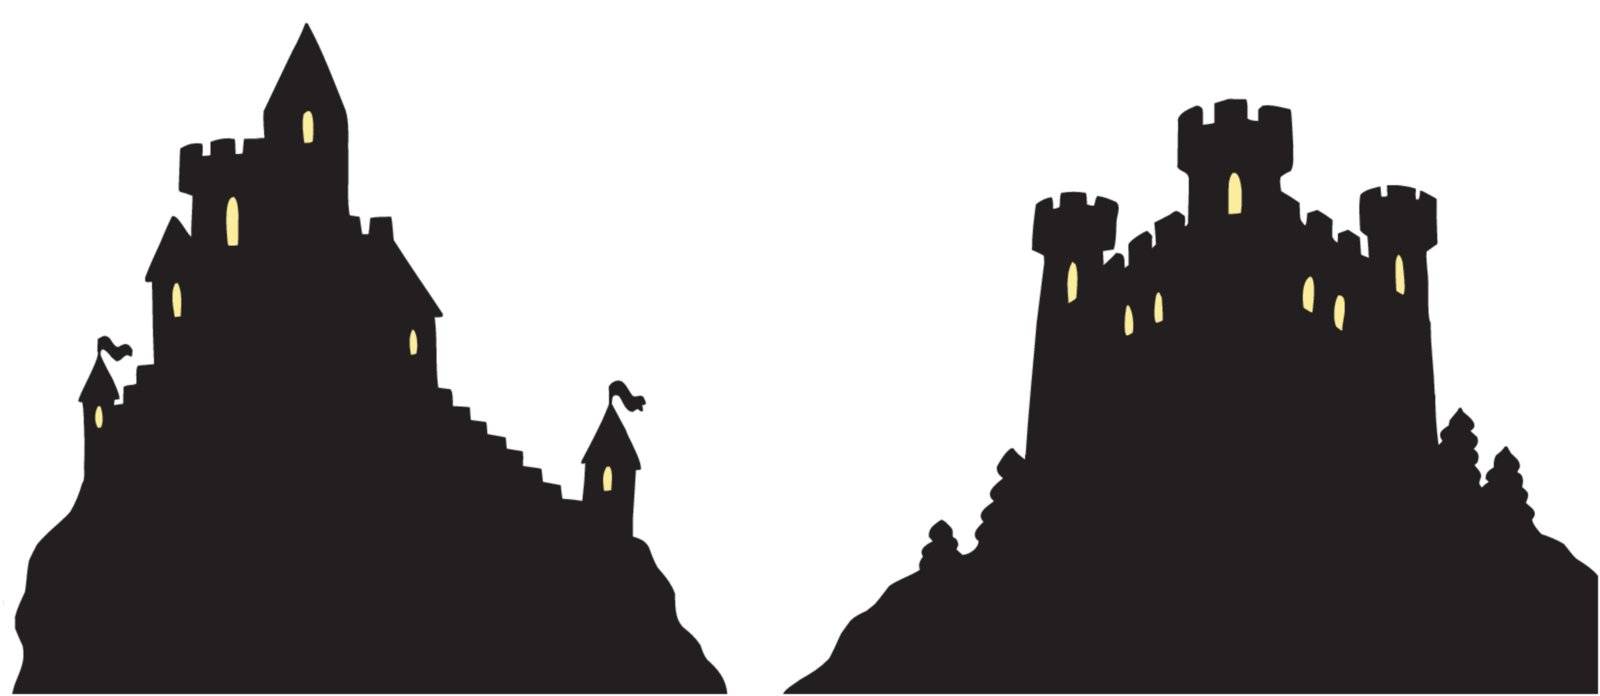 Castles silhouettes on white background - vector illustration.